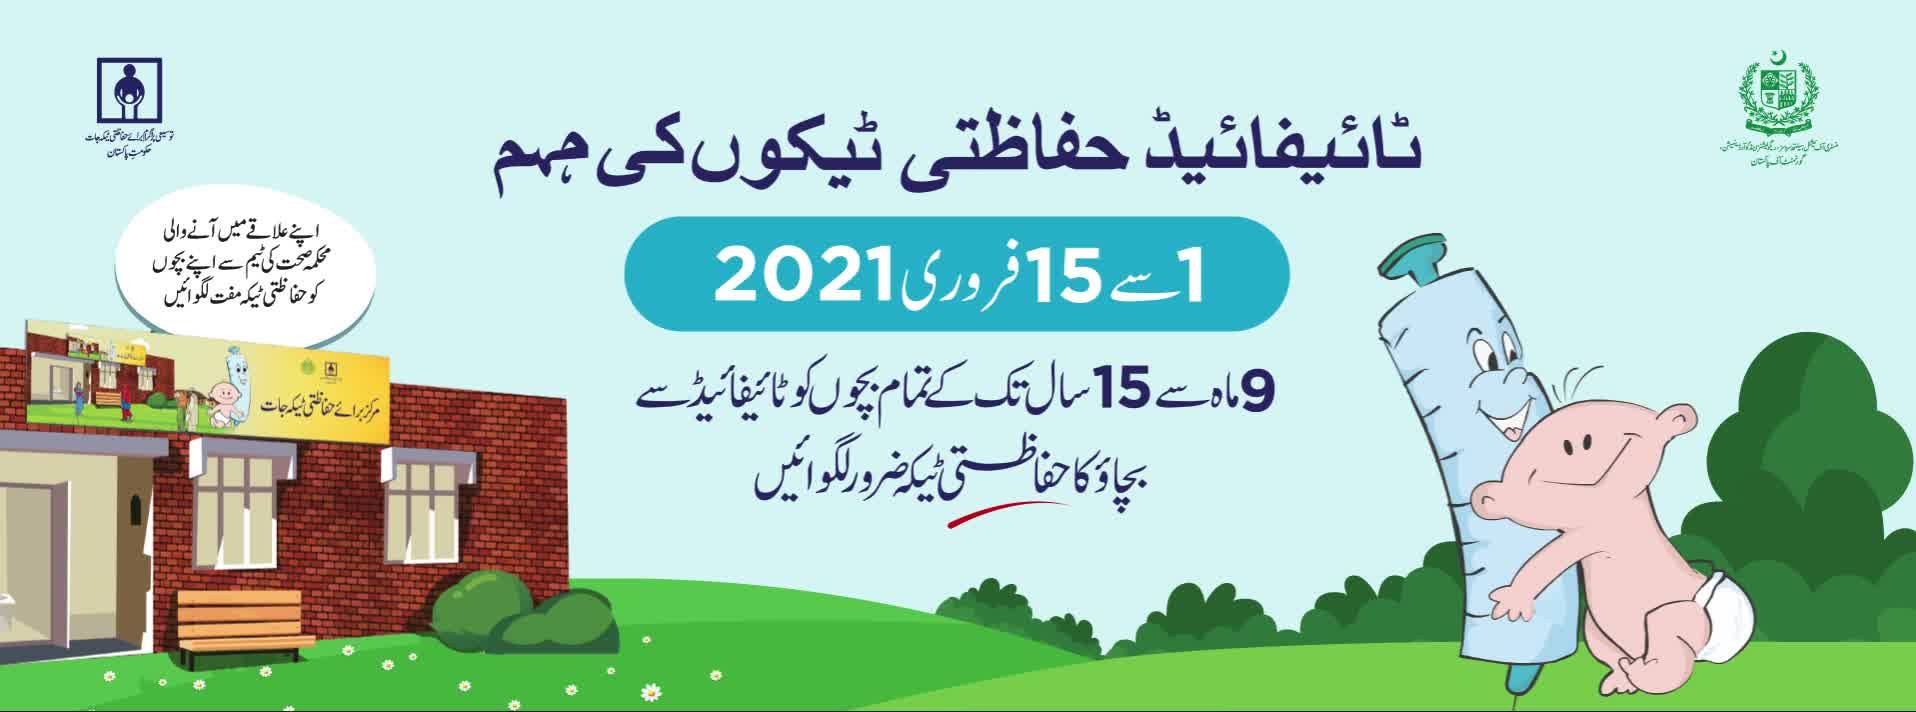 Typhoid Conjugate Vaccine Campaign conducted in Punjab and Islamabad (1st to 15th February, 2021)